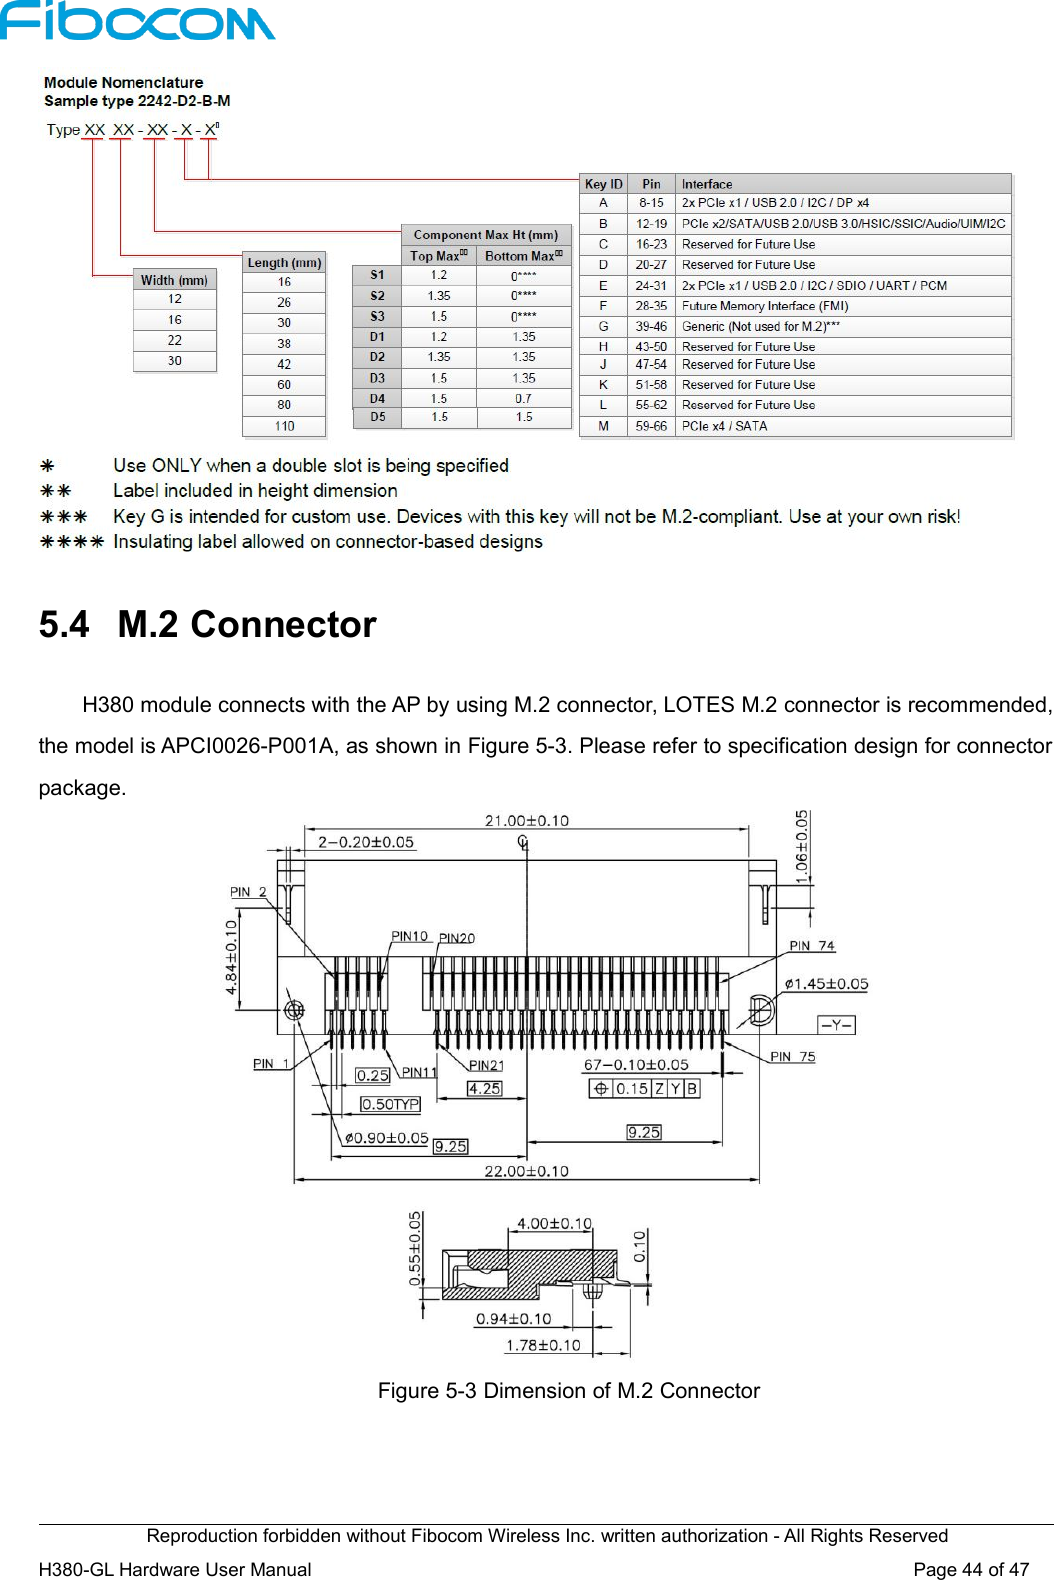 Reproduction forbidden without Fibocom Wireless Inc. written authorization - All Rights ReservedH380-GL Hardware User Manual Page44of475.4 M.2 ConnectorH380 module connects with the AP by using M.2 connector, LOTES M.2 connector is recommended,the model is APCI0026-P001A, as shown in Figure 5-3. Please refer to specification design for connectorpackage.Figure 5-3 Dimension of M.2 Connector